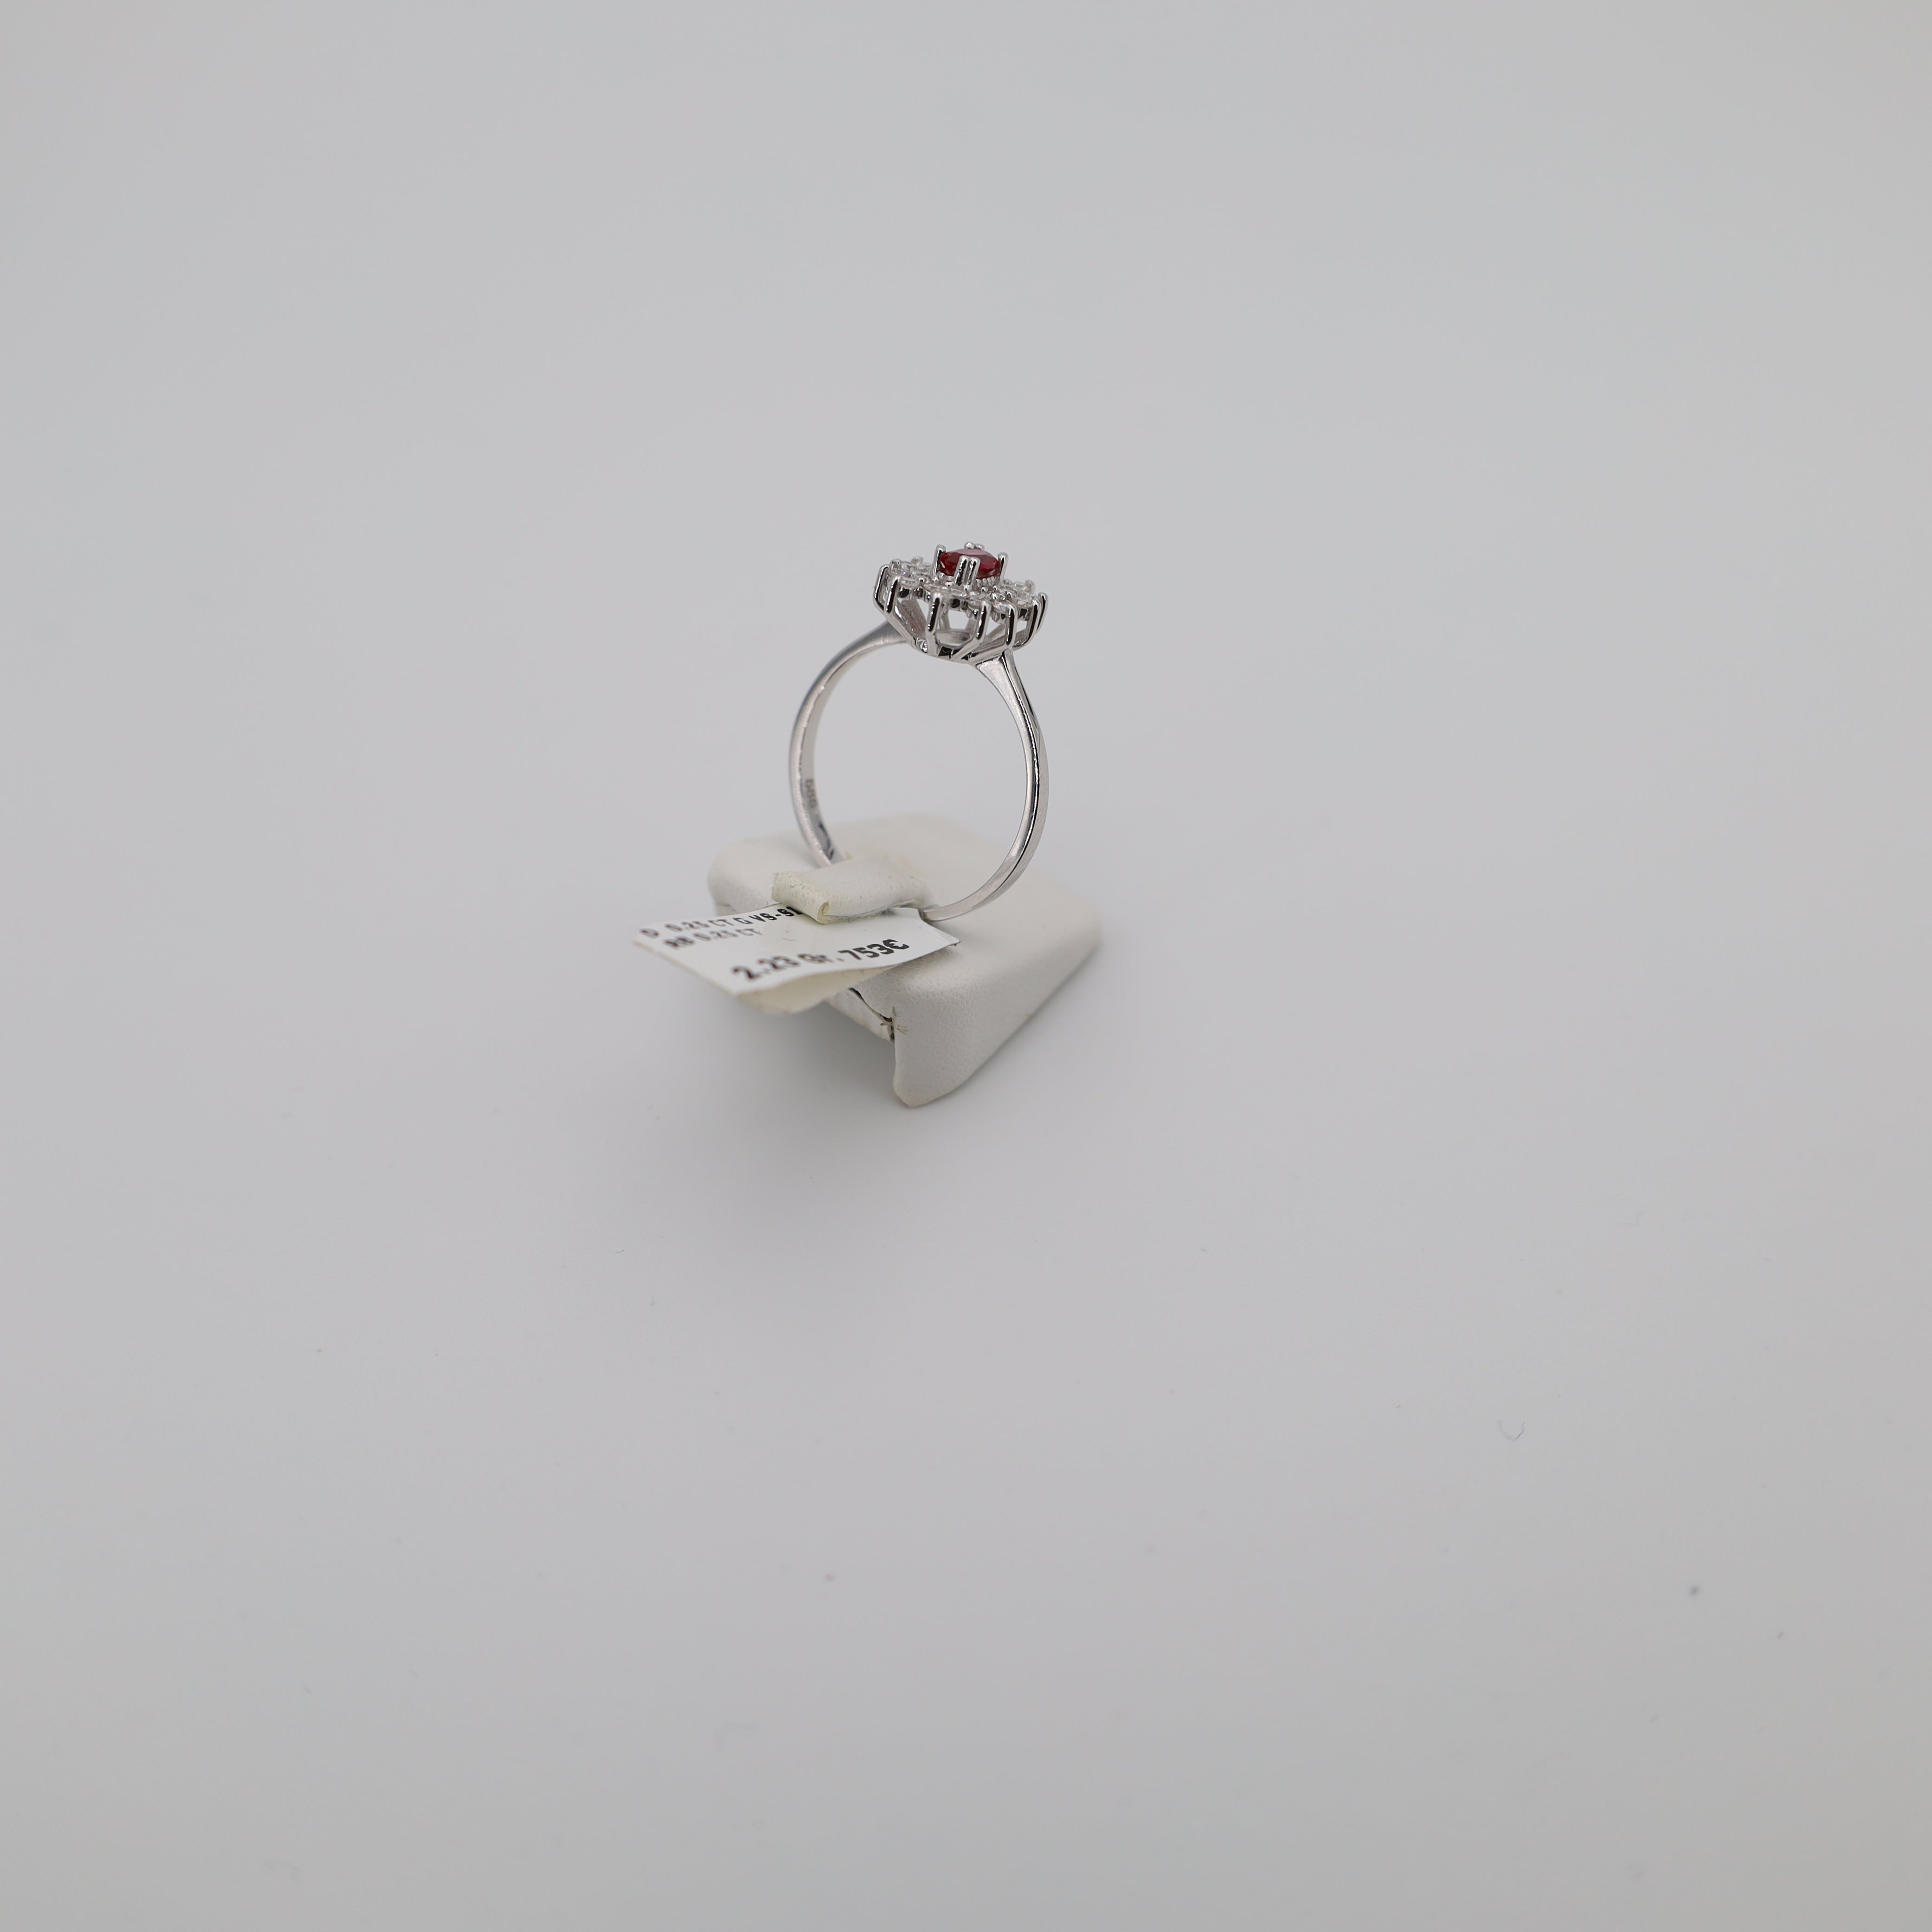 Ring Nr. 062 D  . 0.25 ct G VS-SI RB .0.25ct